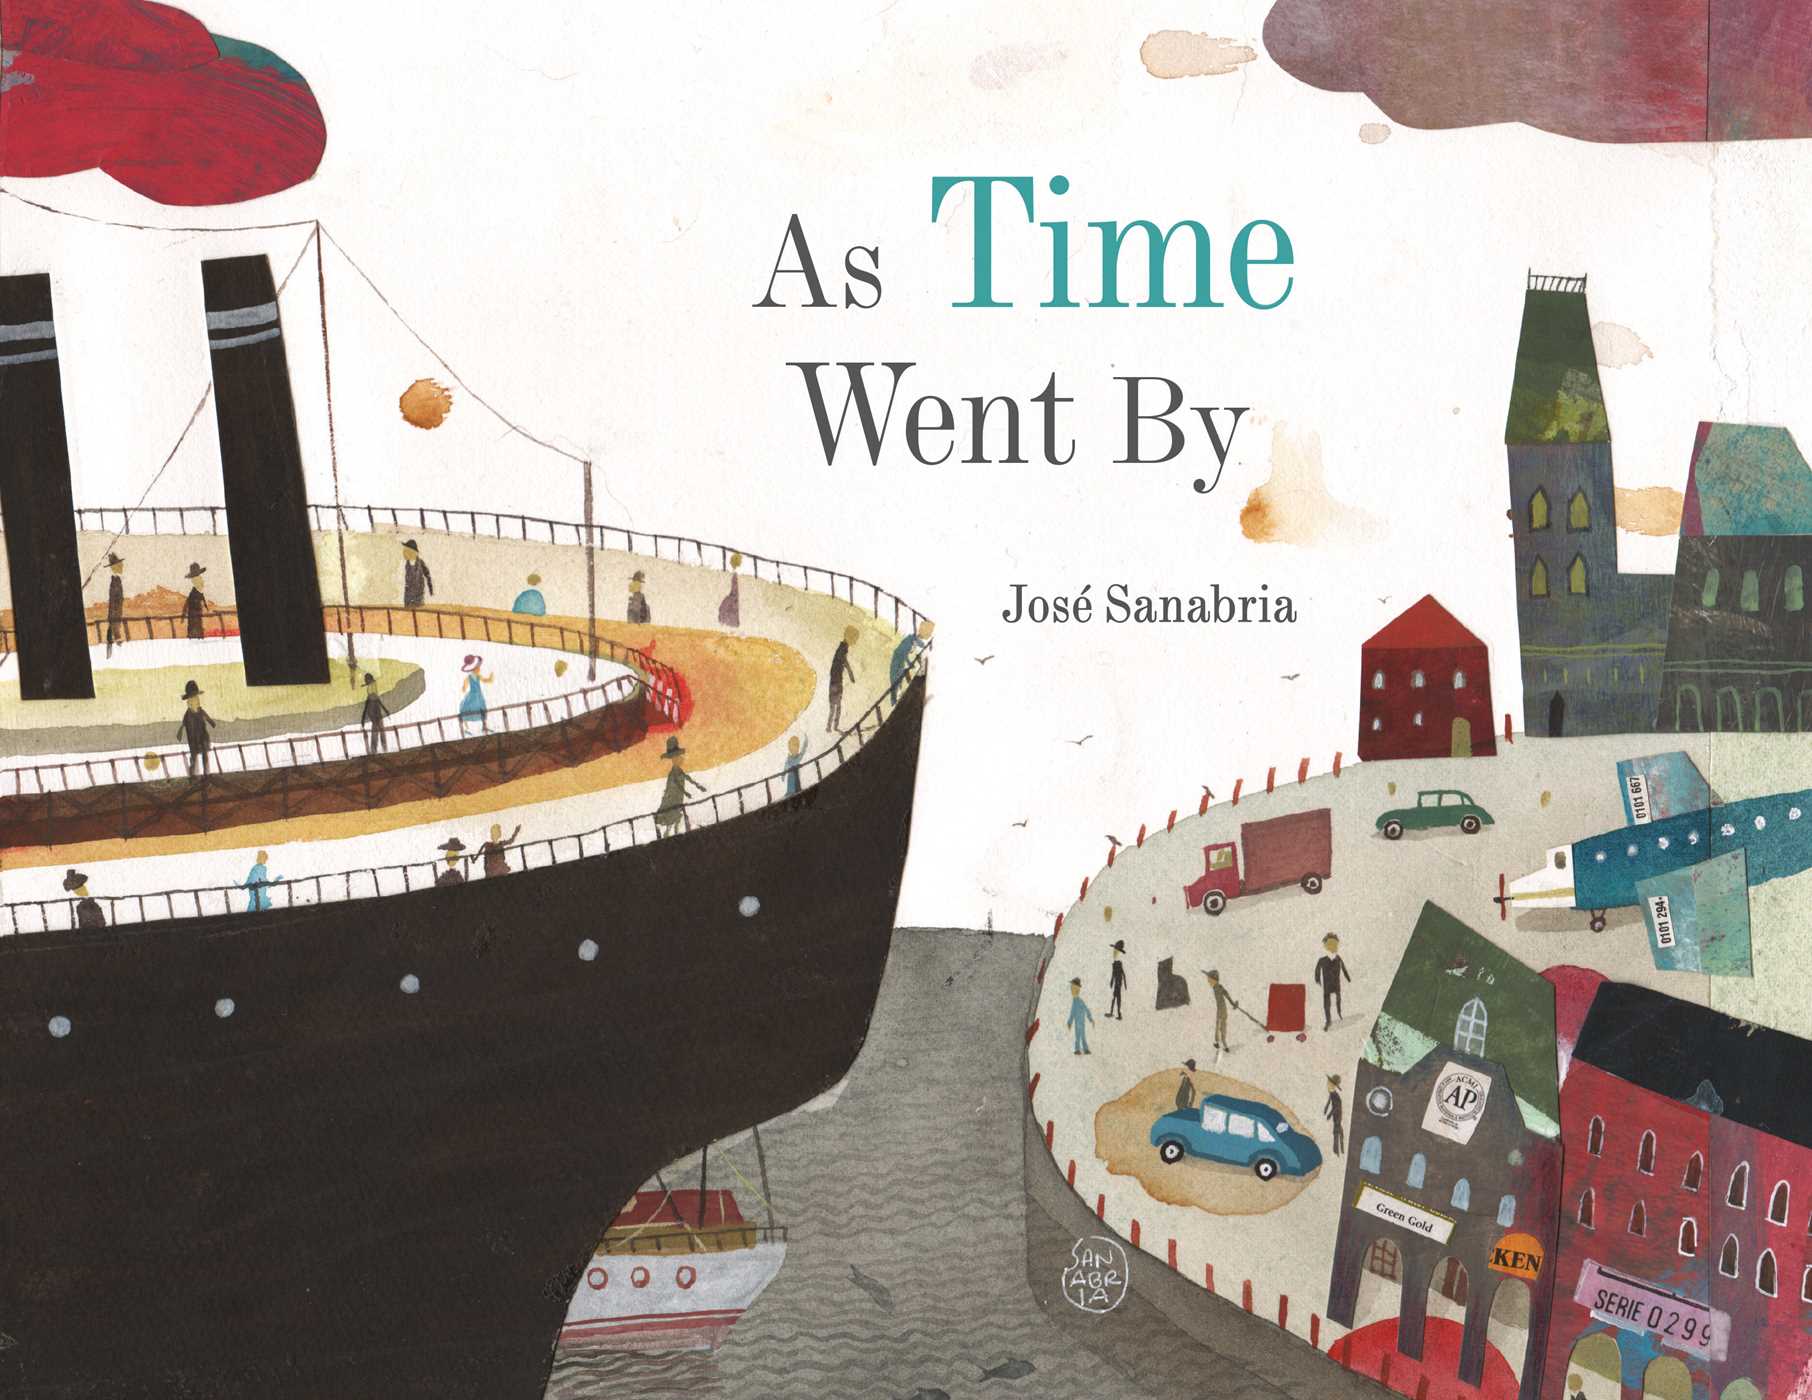 Cover for As Time Went By featuring an illustration of a ship either approaching or leaving a dock with people on the ship and people and buildings on the shore. The background is white and the clouds and smoke from the ship are red. There are red accents and a greenish brown color story in the shore's cityscape.